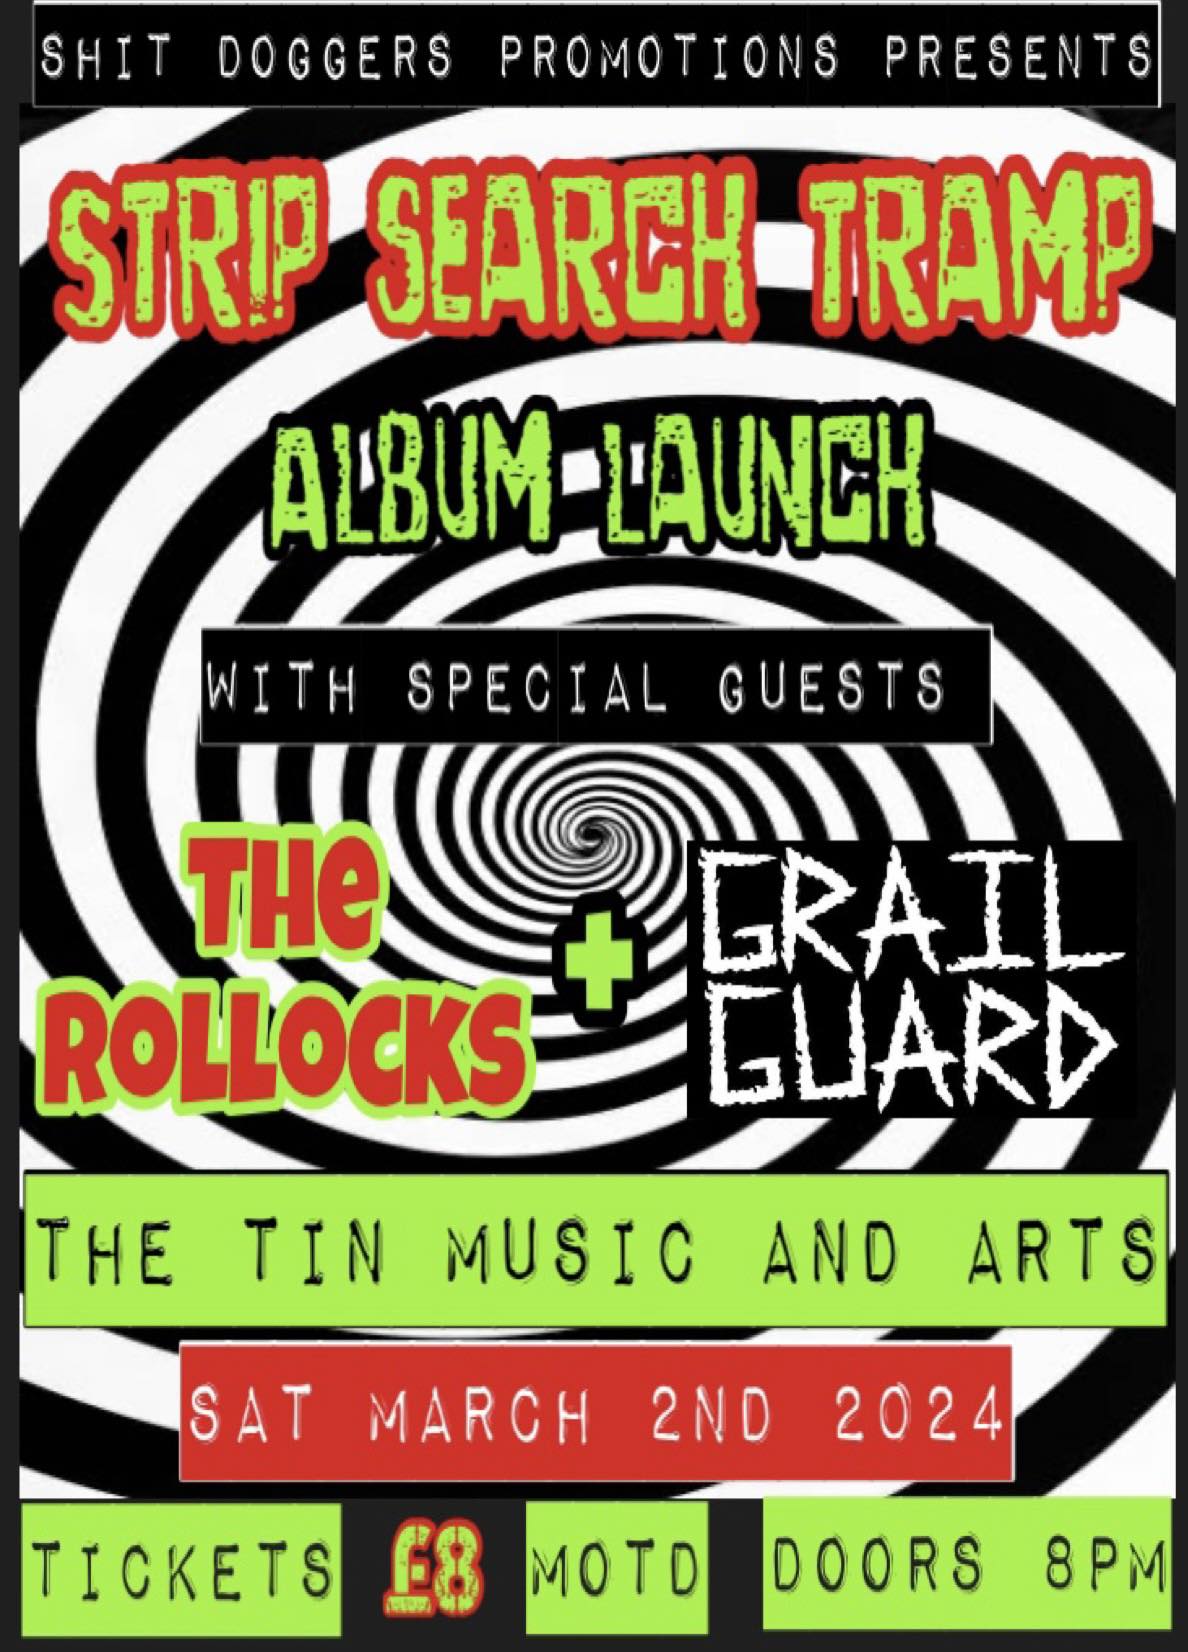 Poster for Strip Search Tramp's album launch gig at The Tin Music and Arts on Saturday 2nd March 2024. Special guests include The Rollocks and Grail Guard. Tickets are £8 and doors are at 8pm.